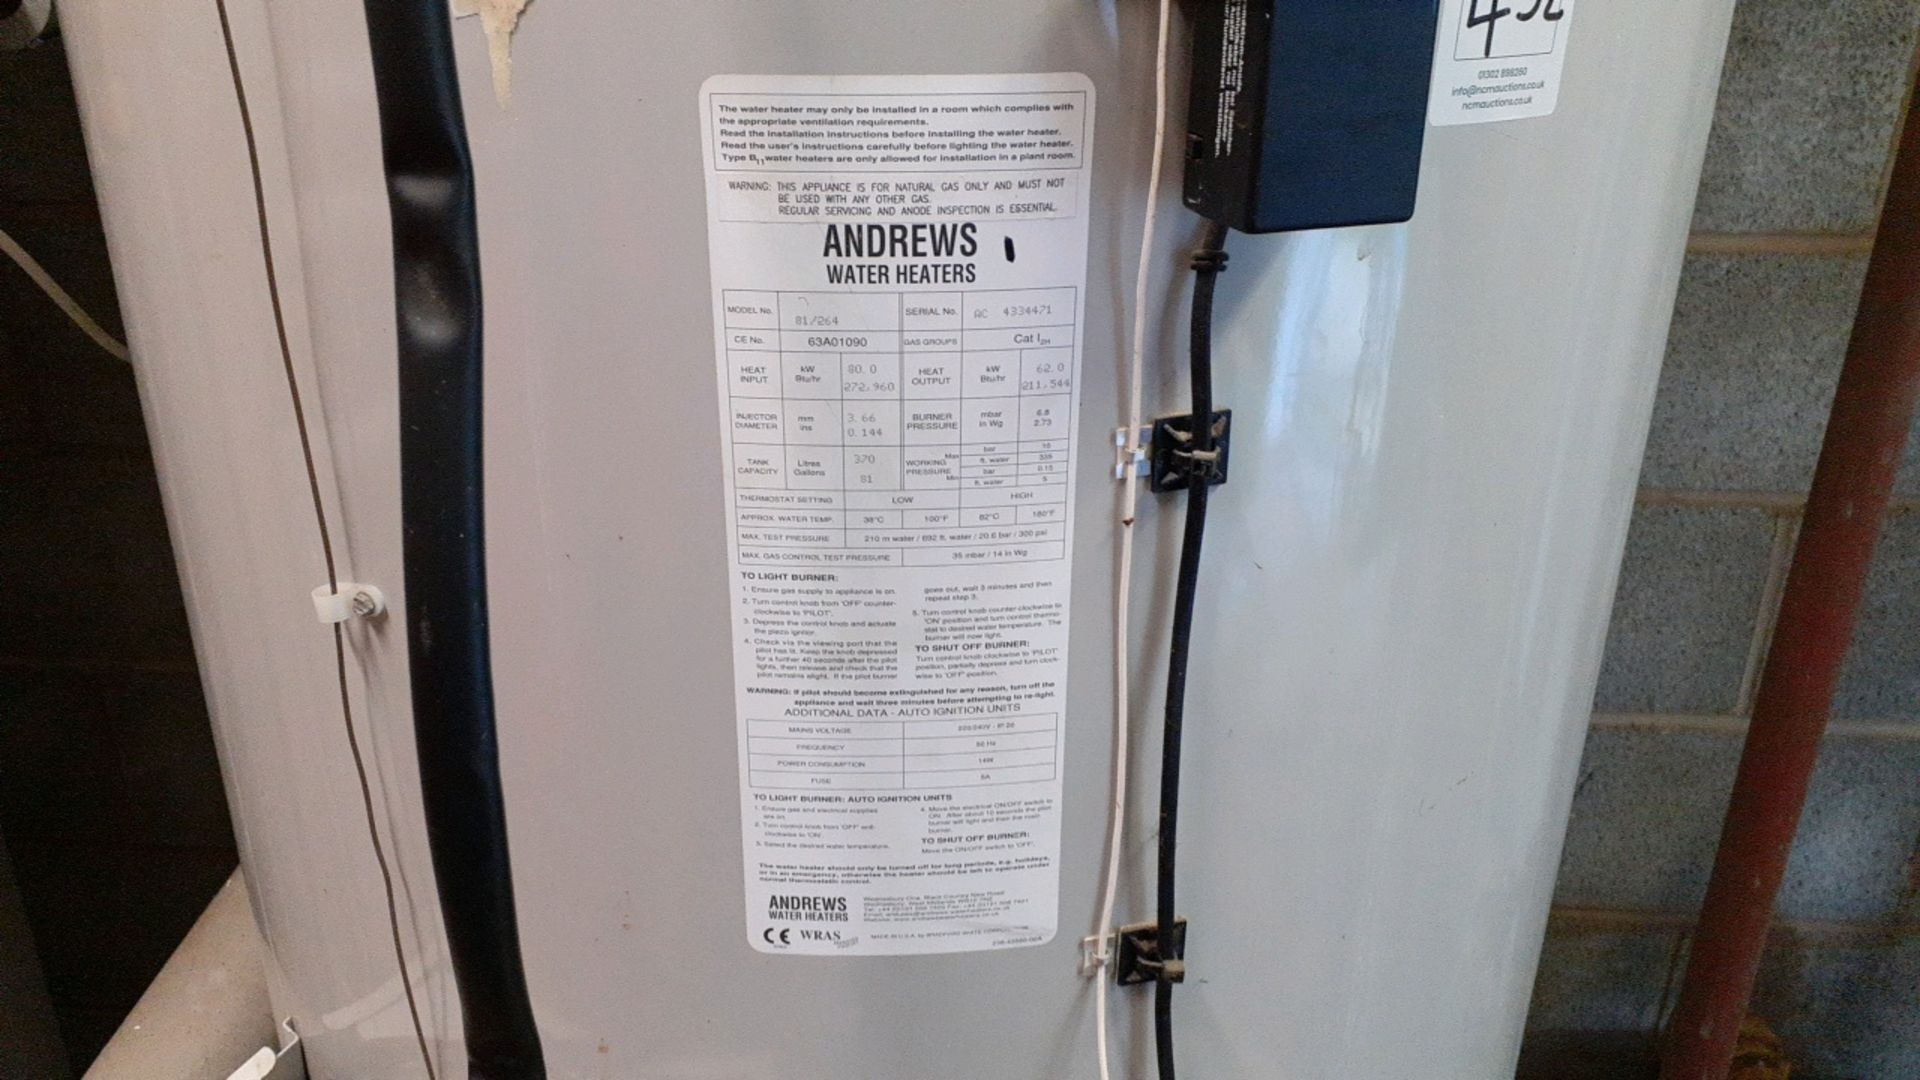 Water heater - Image 4 of 4